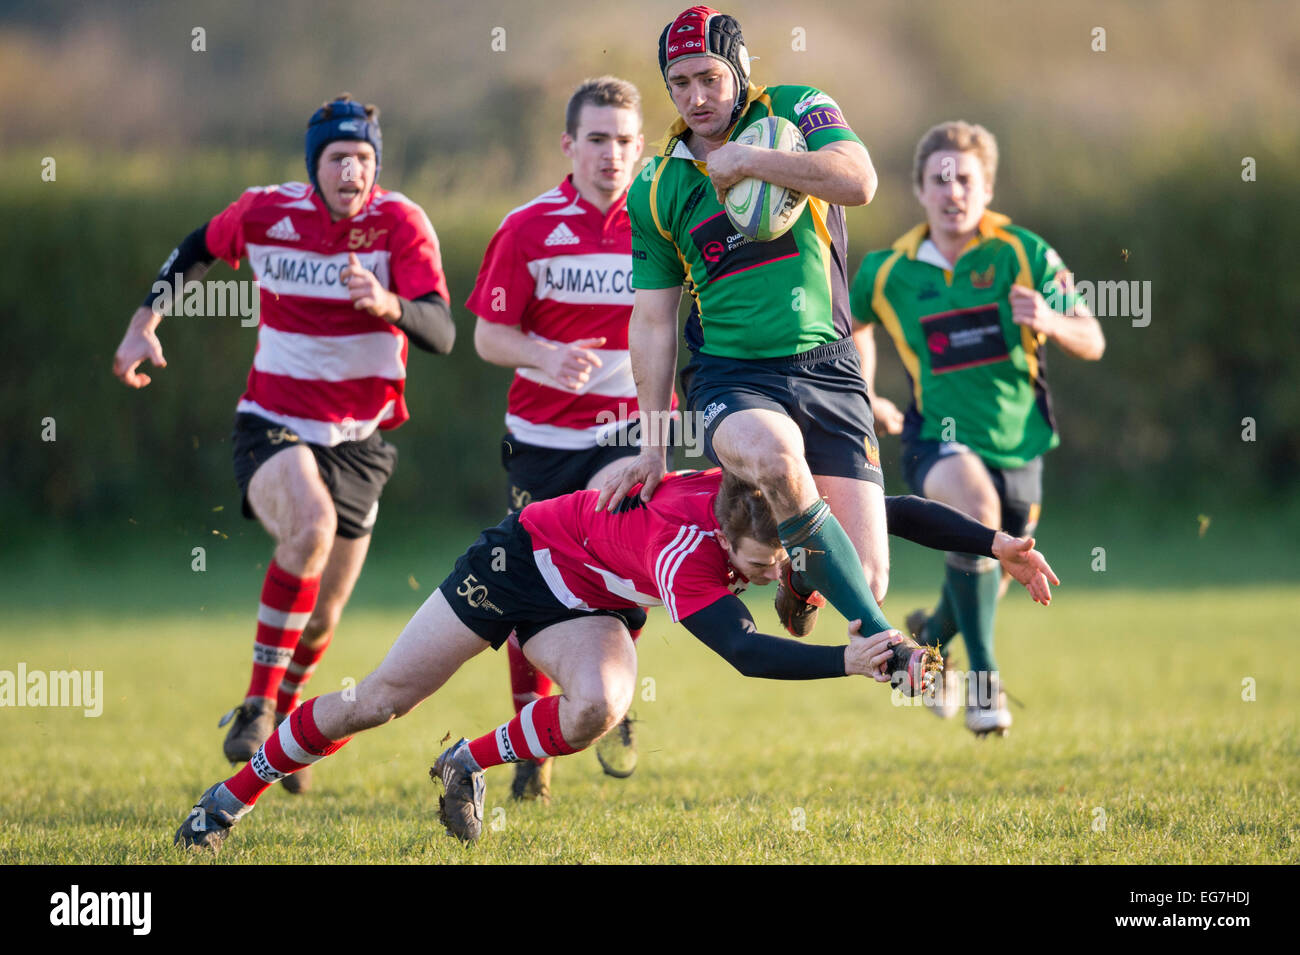 Rugby, player being tackled. Stock Photo